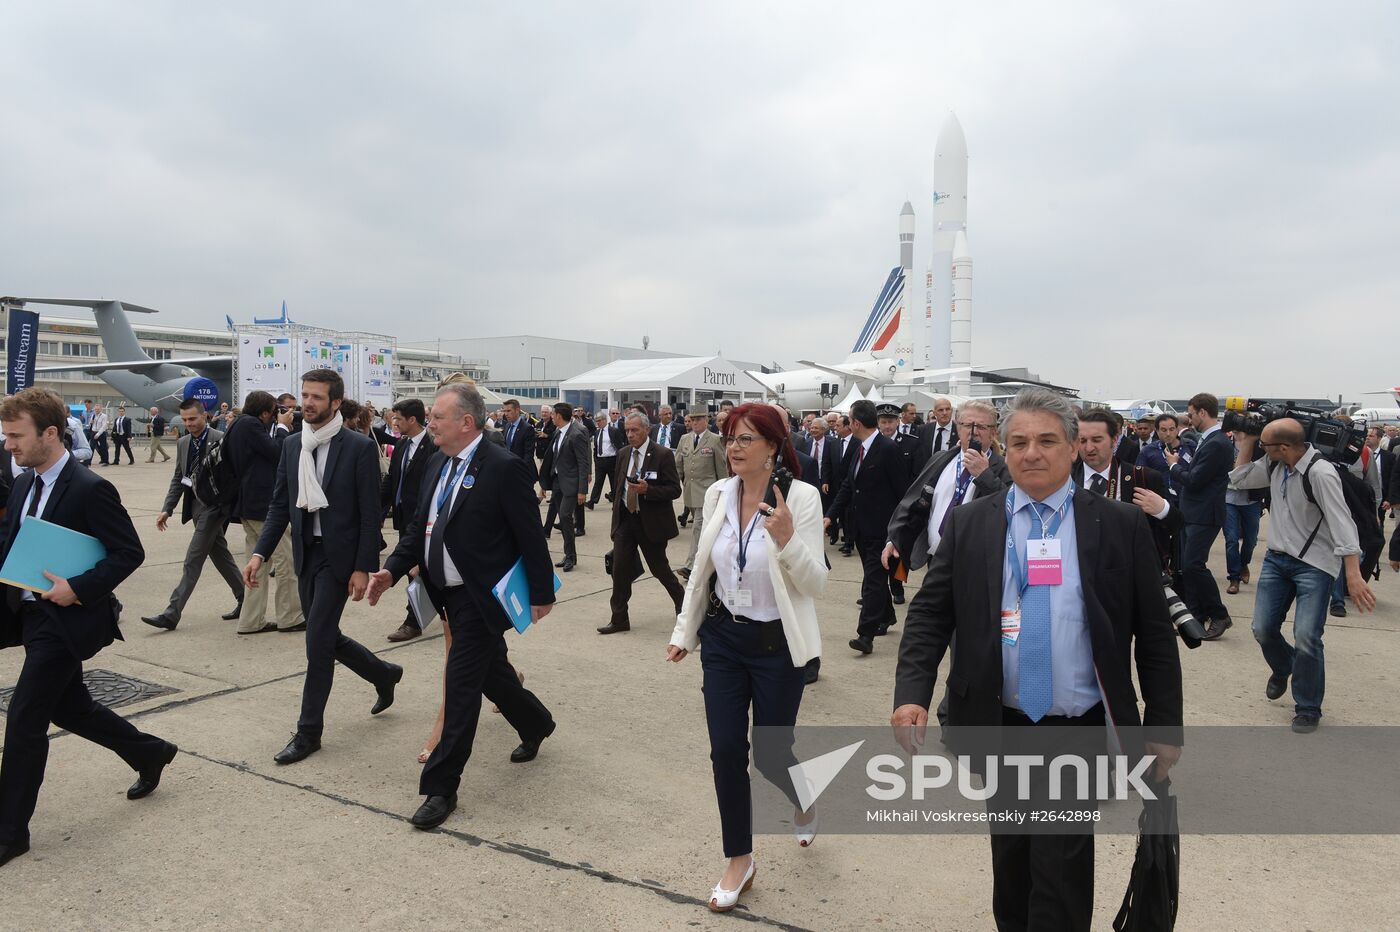 Opening of the International Paris Air Show - Le Bourget 2015